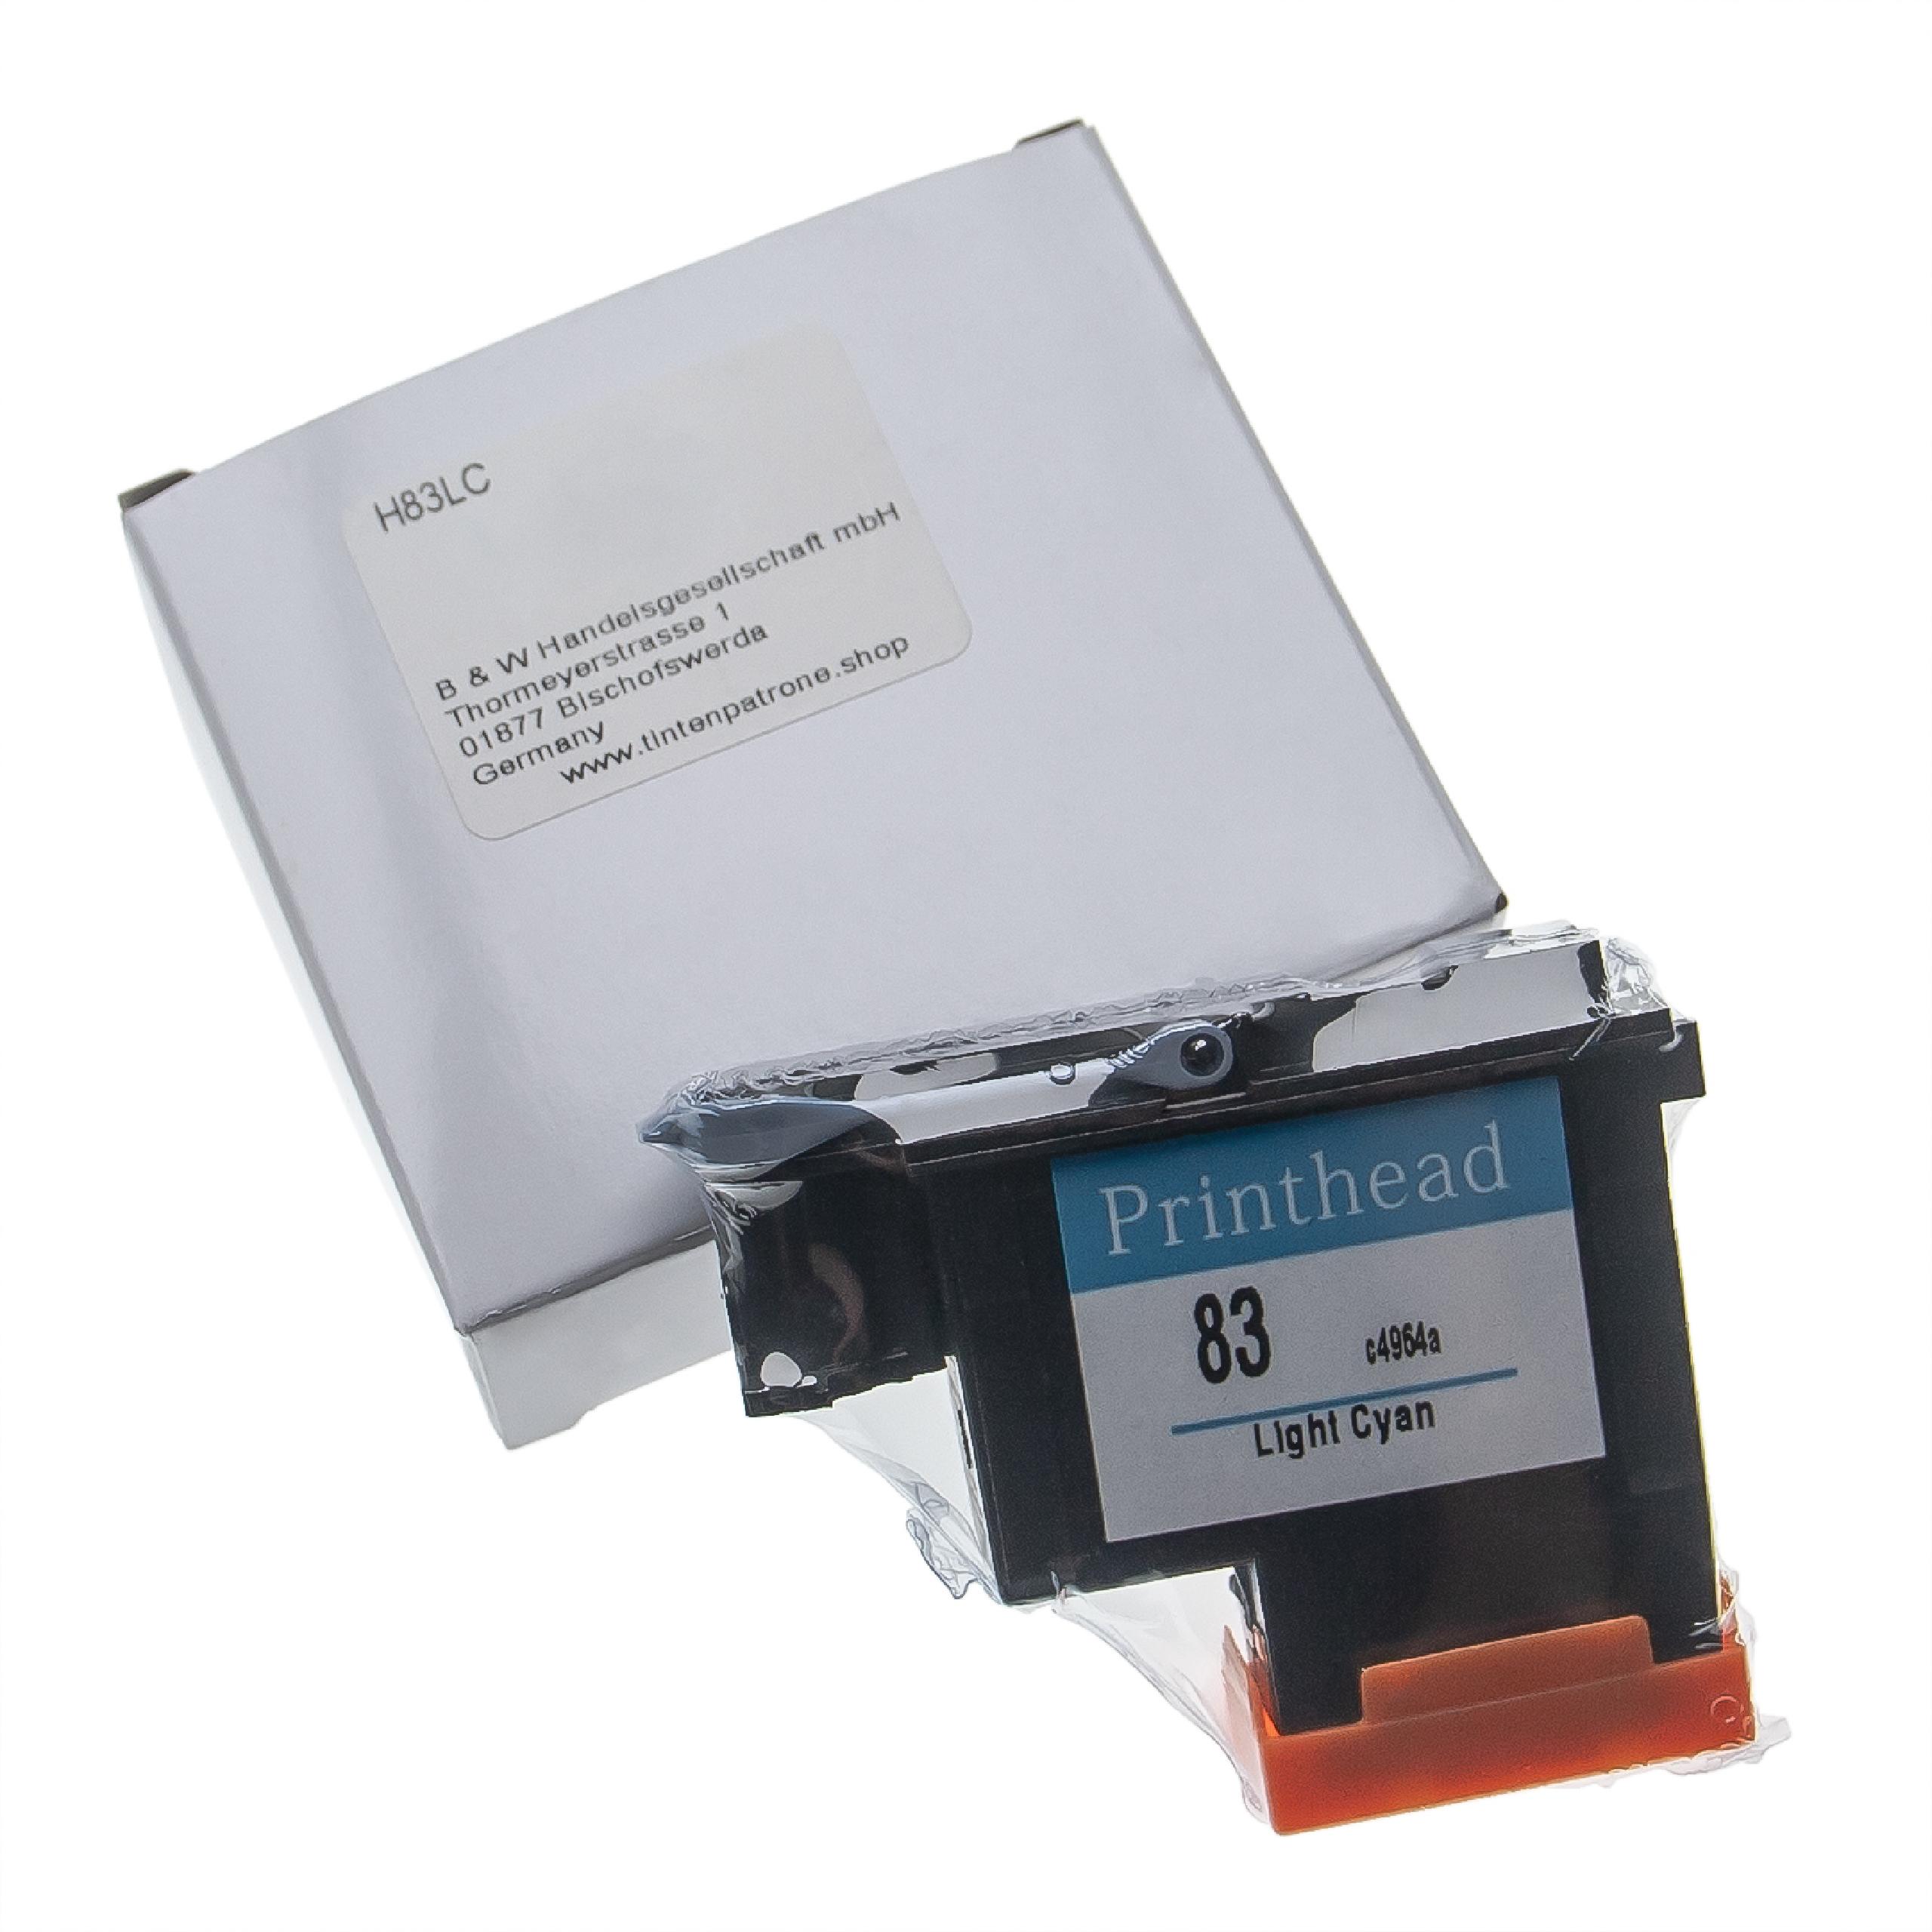 Printhead for HP DesignJet HP C4964A Printer - 13 ml, light cyan, 6 cm wide, Refurbished, With Cleaner